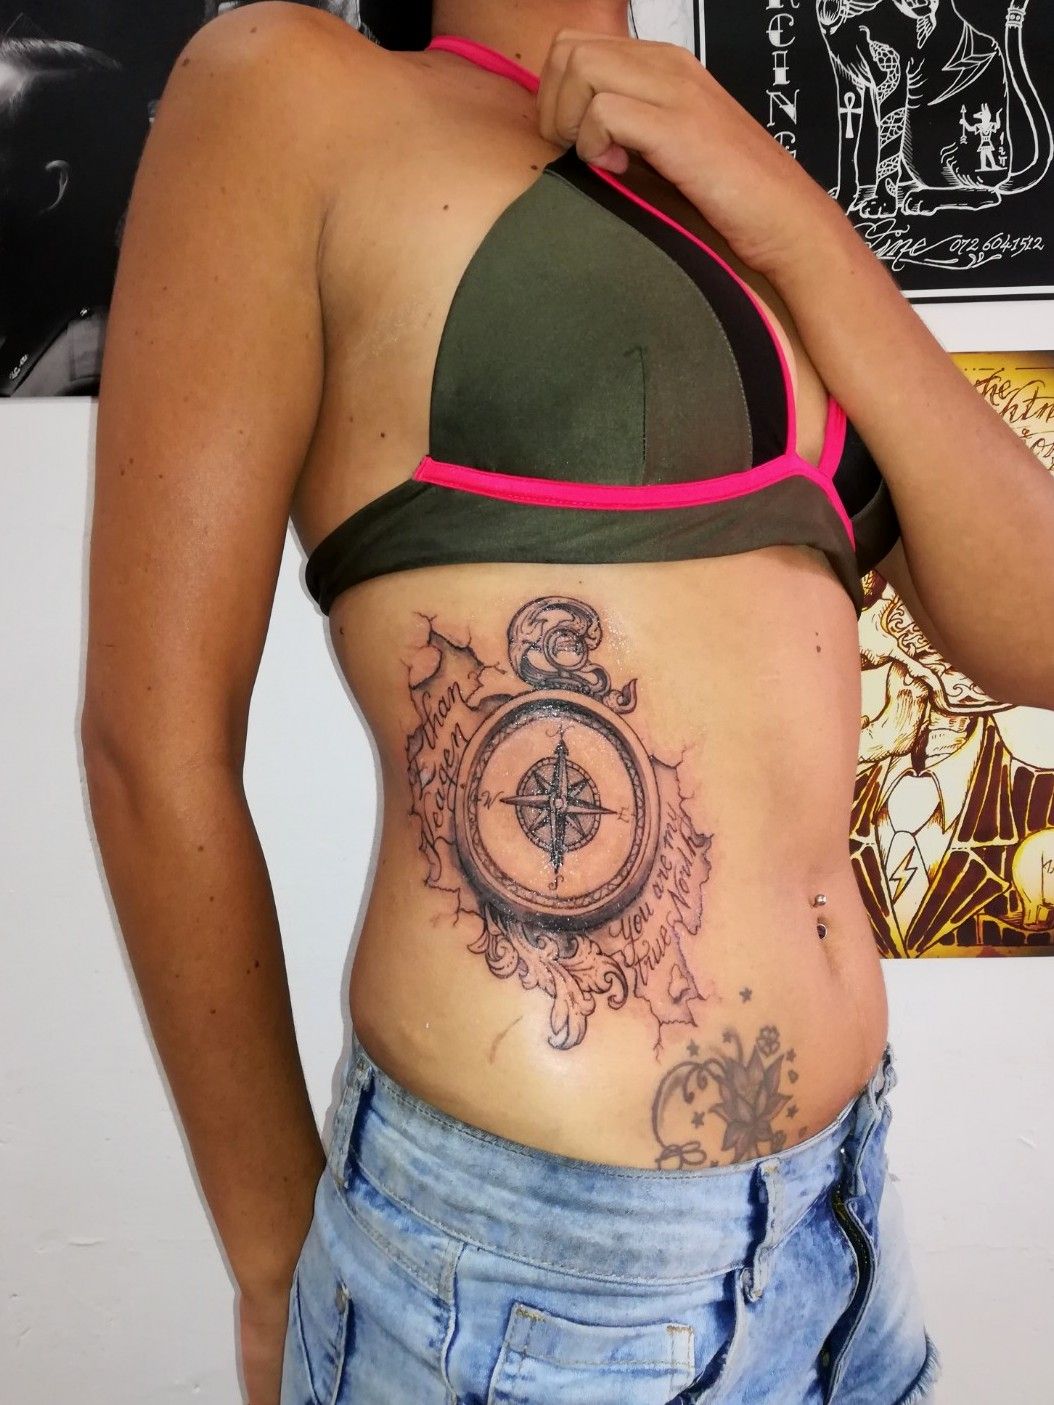 Heloisa Alves on Instagram FAIR WINDS AND FOLLOWING SEAS  Sailing  journey starting and Im thinking of getting another tattoo What should I